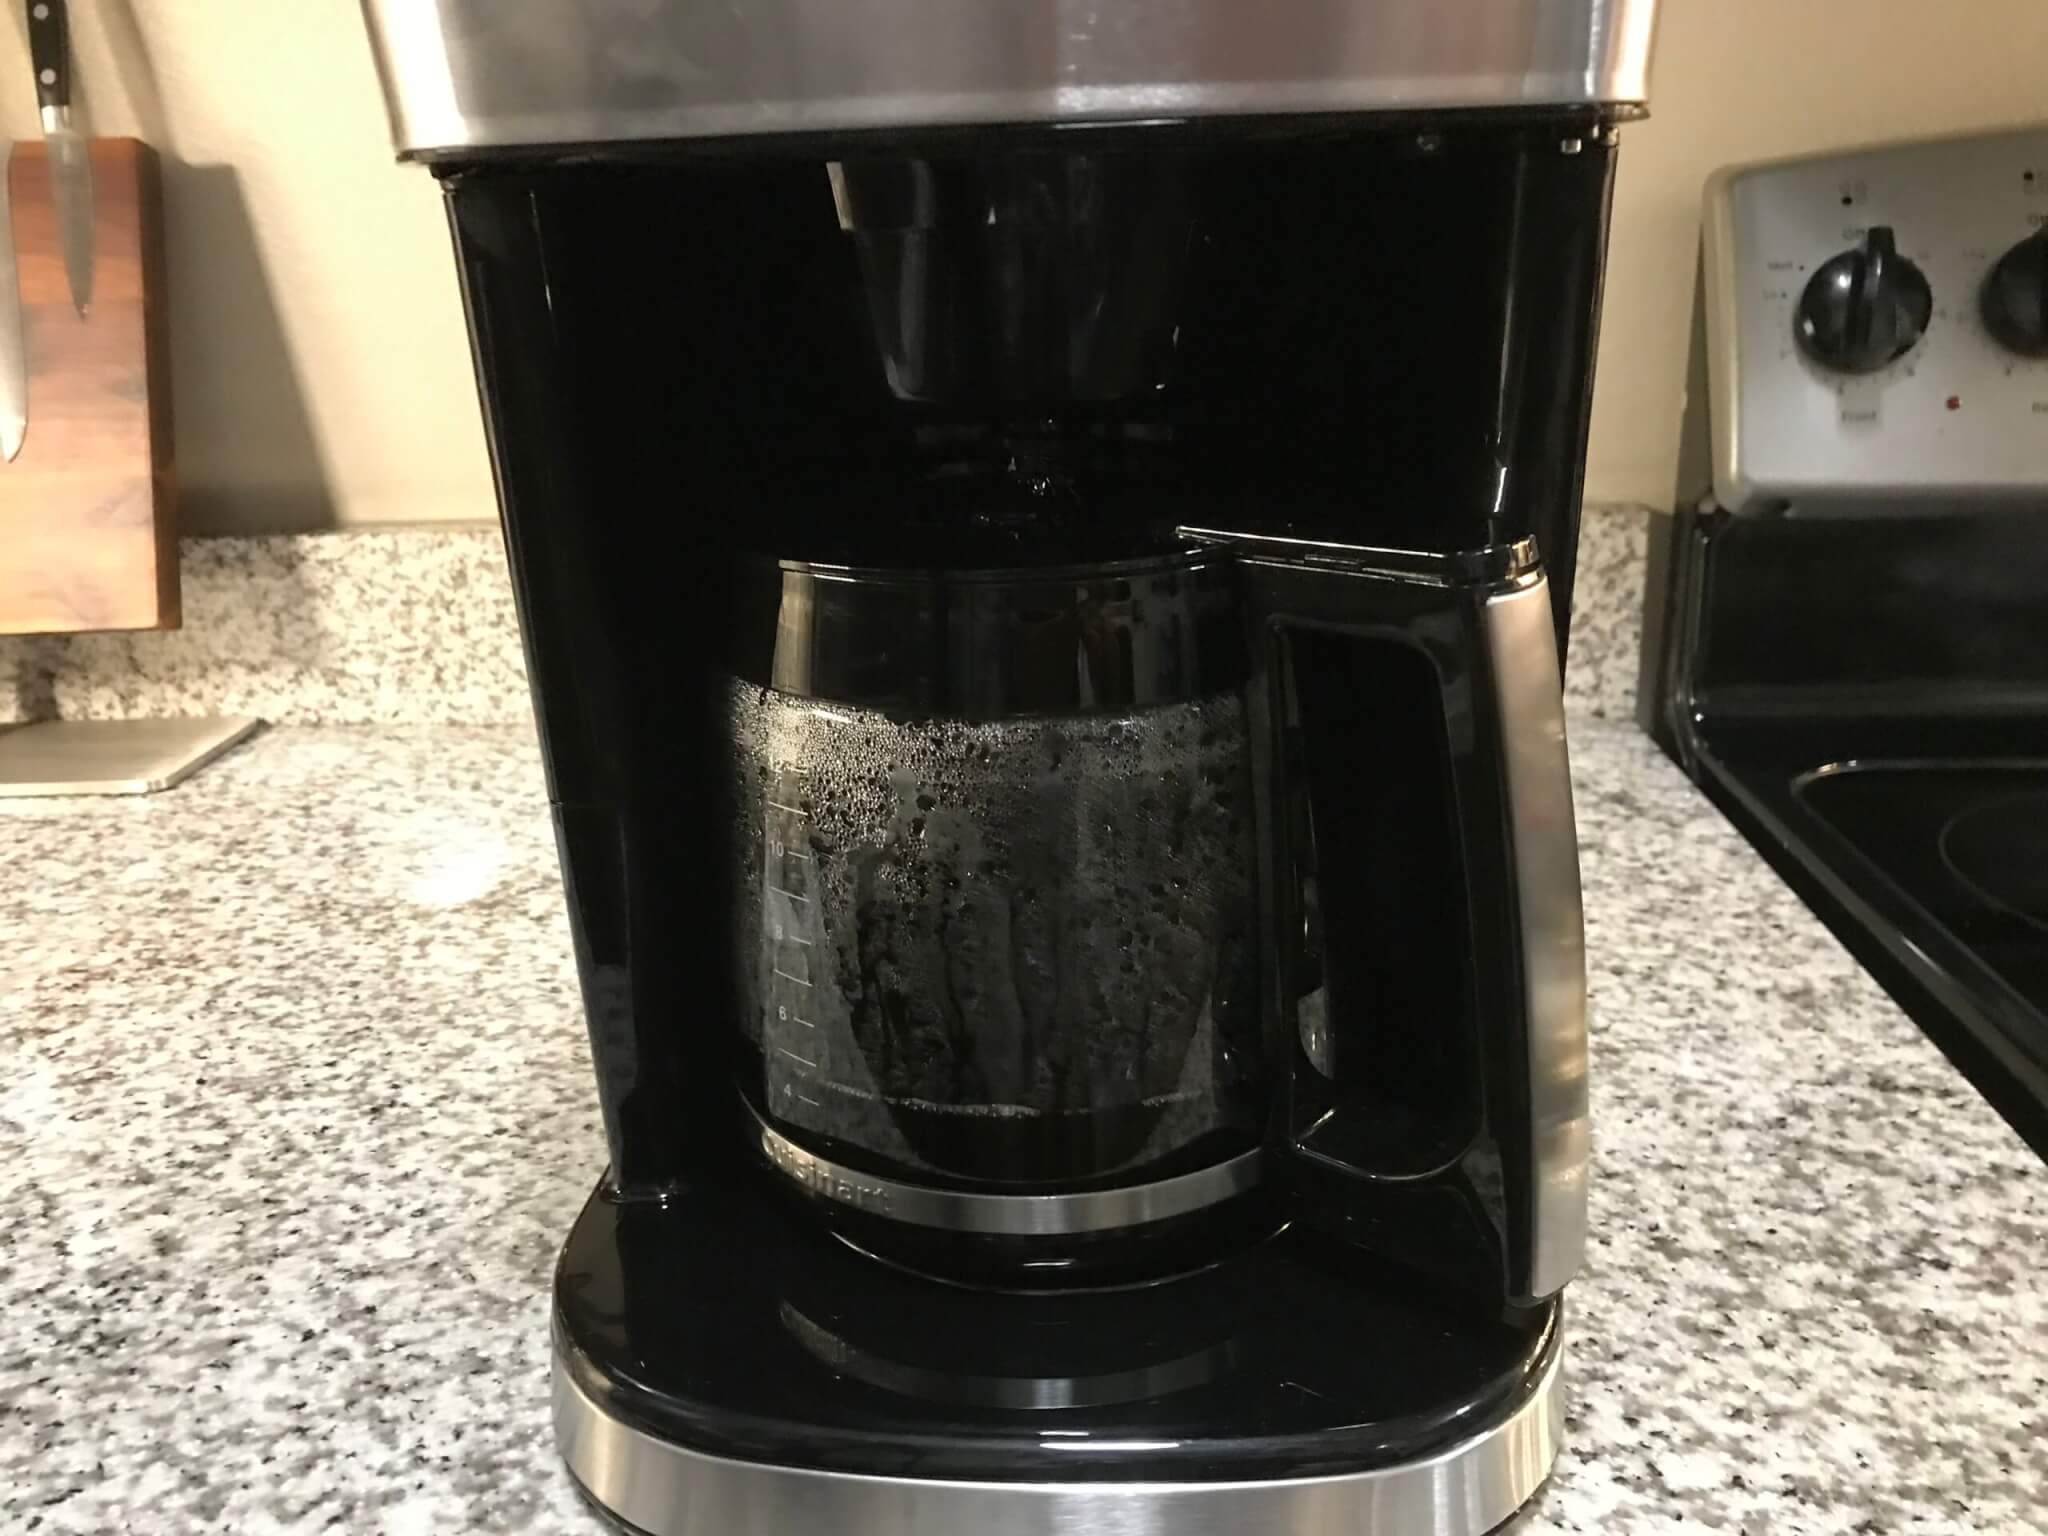 https://studyfinds.org/wp-content/uploads/2023/12/Cuisinart-DGB-800-Fully-Automatic-Burr-Grind-Brew-12-Cup-Glass-in-use-scaled.jpeg